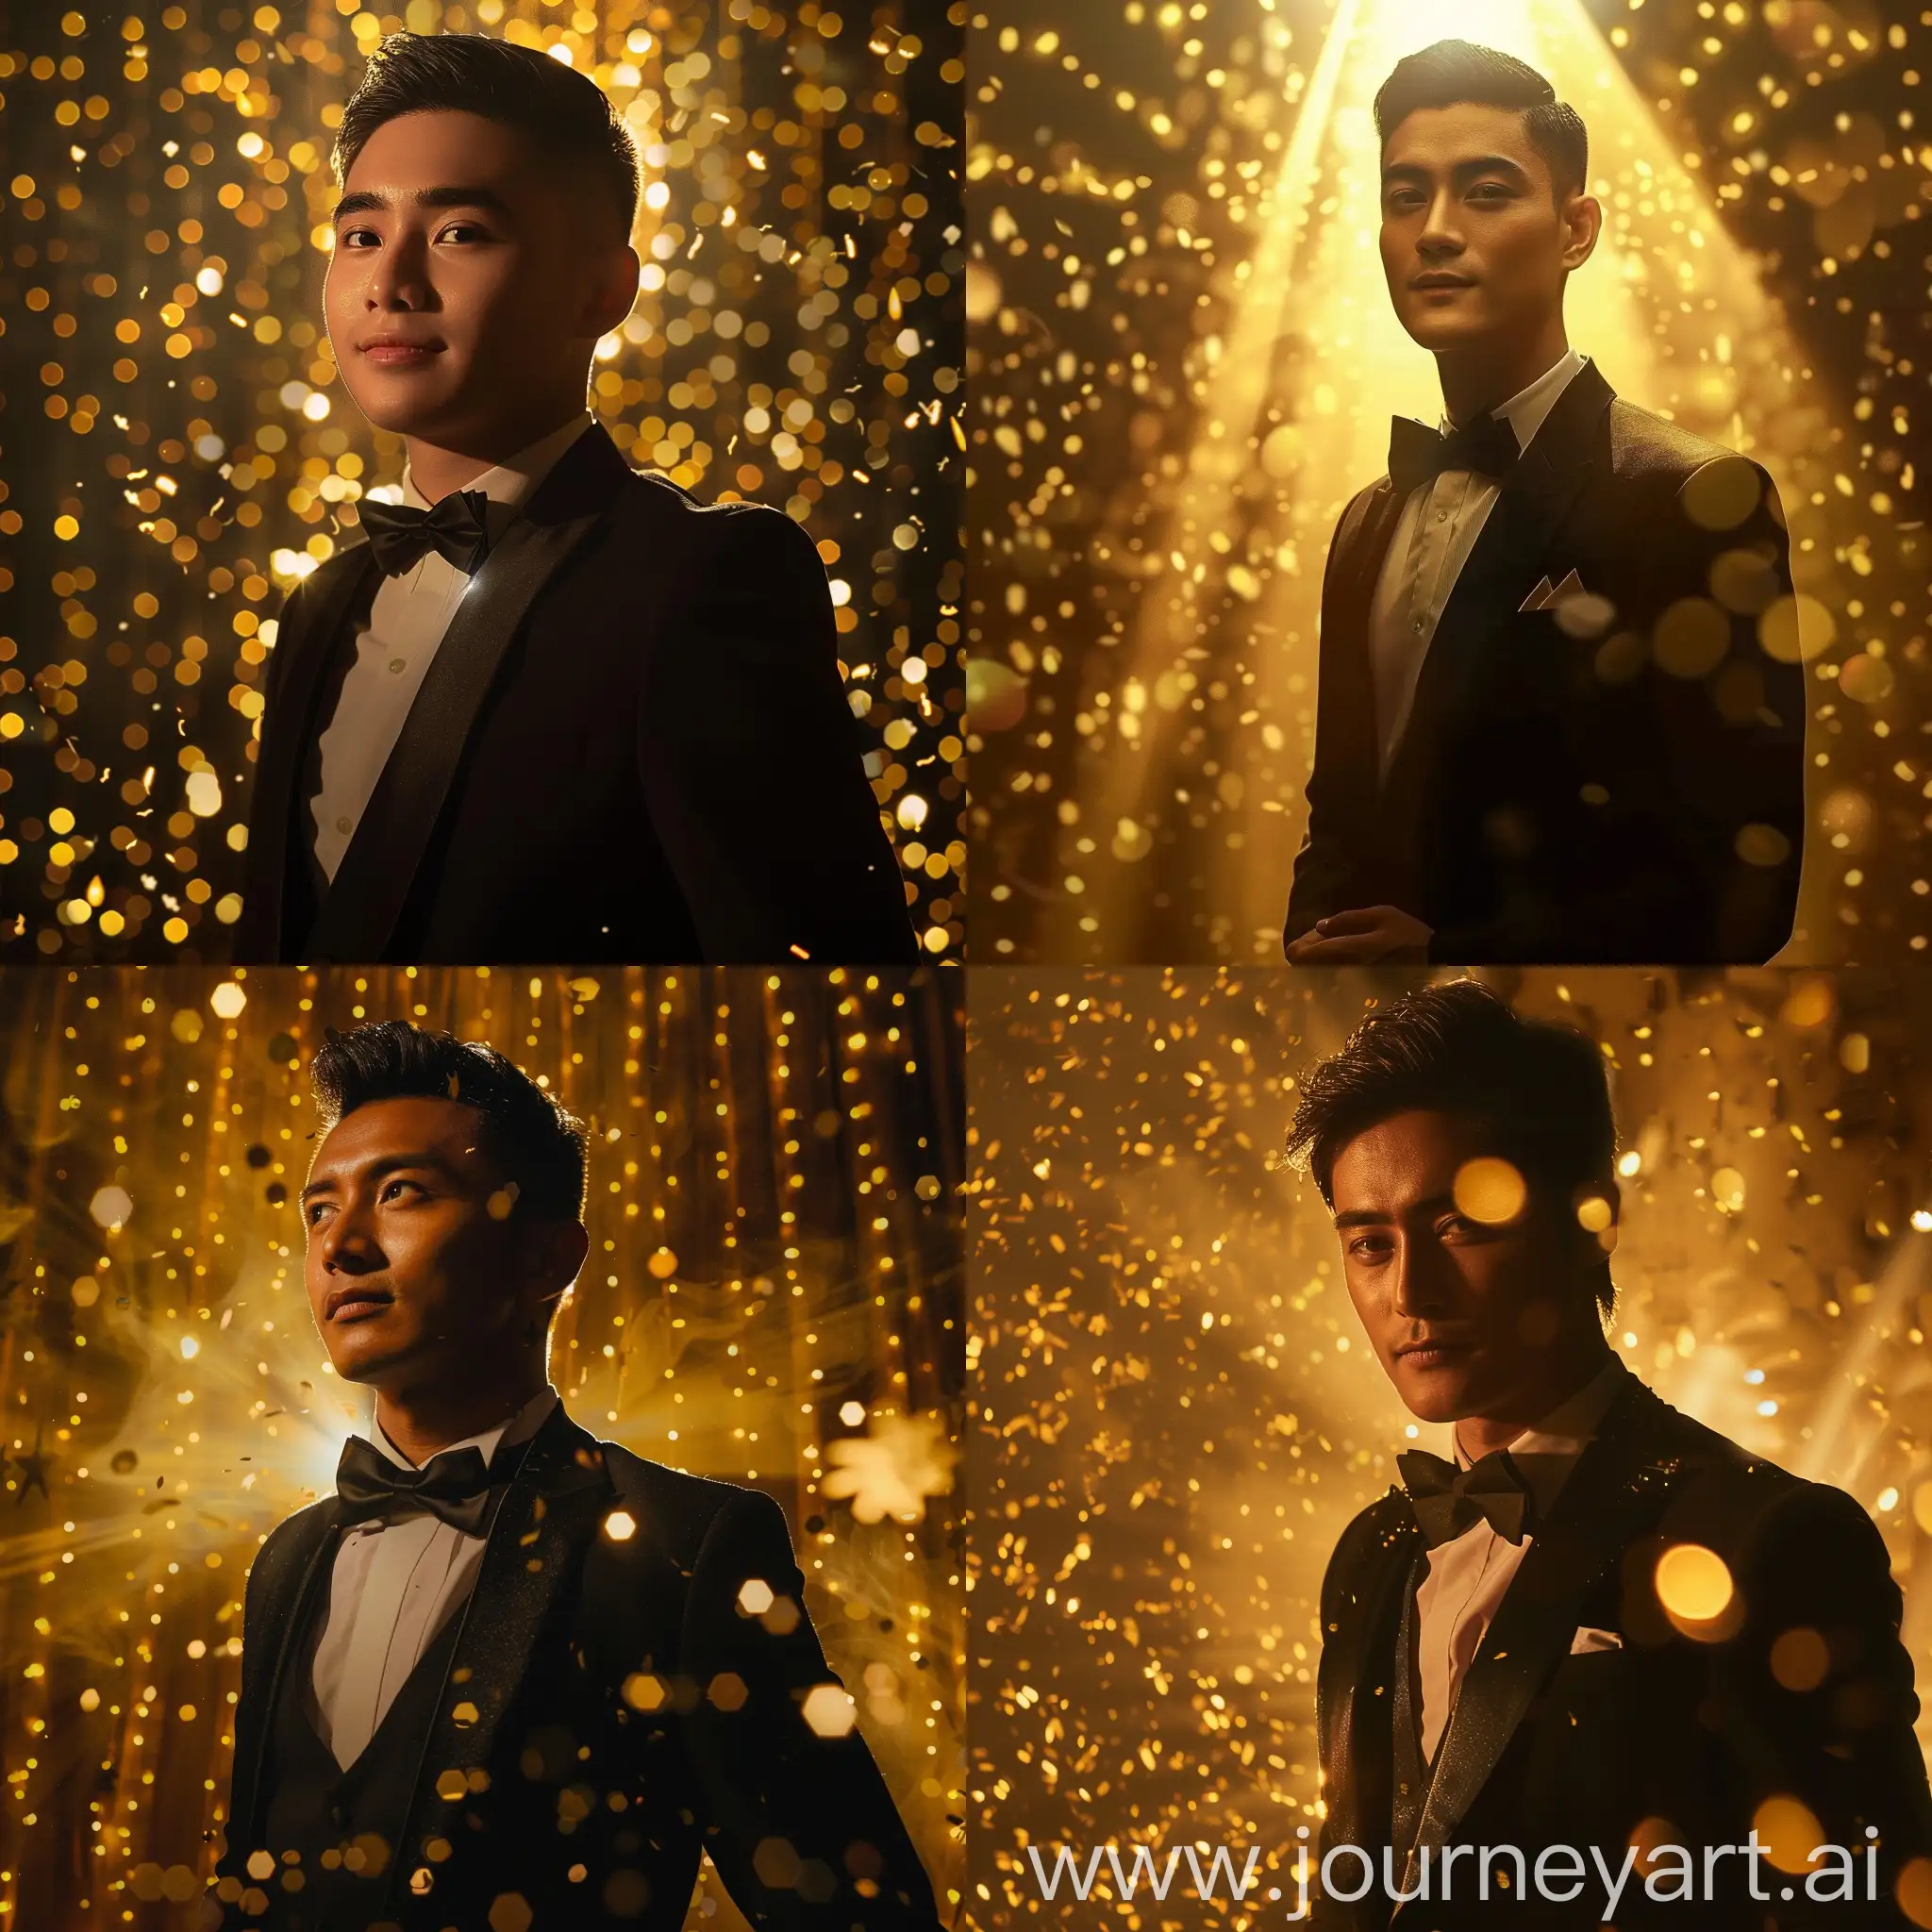 Cid-Kageno-from-The-Eminence-In-Shadow-at-Prom-Tuxedo-with-Black-Tie-Golden-Indoor-Setting